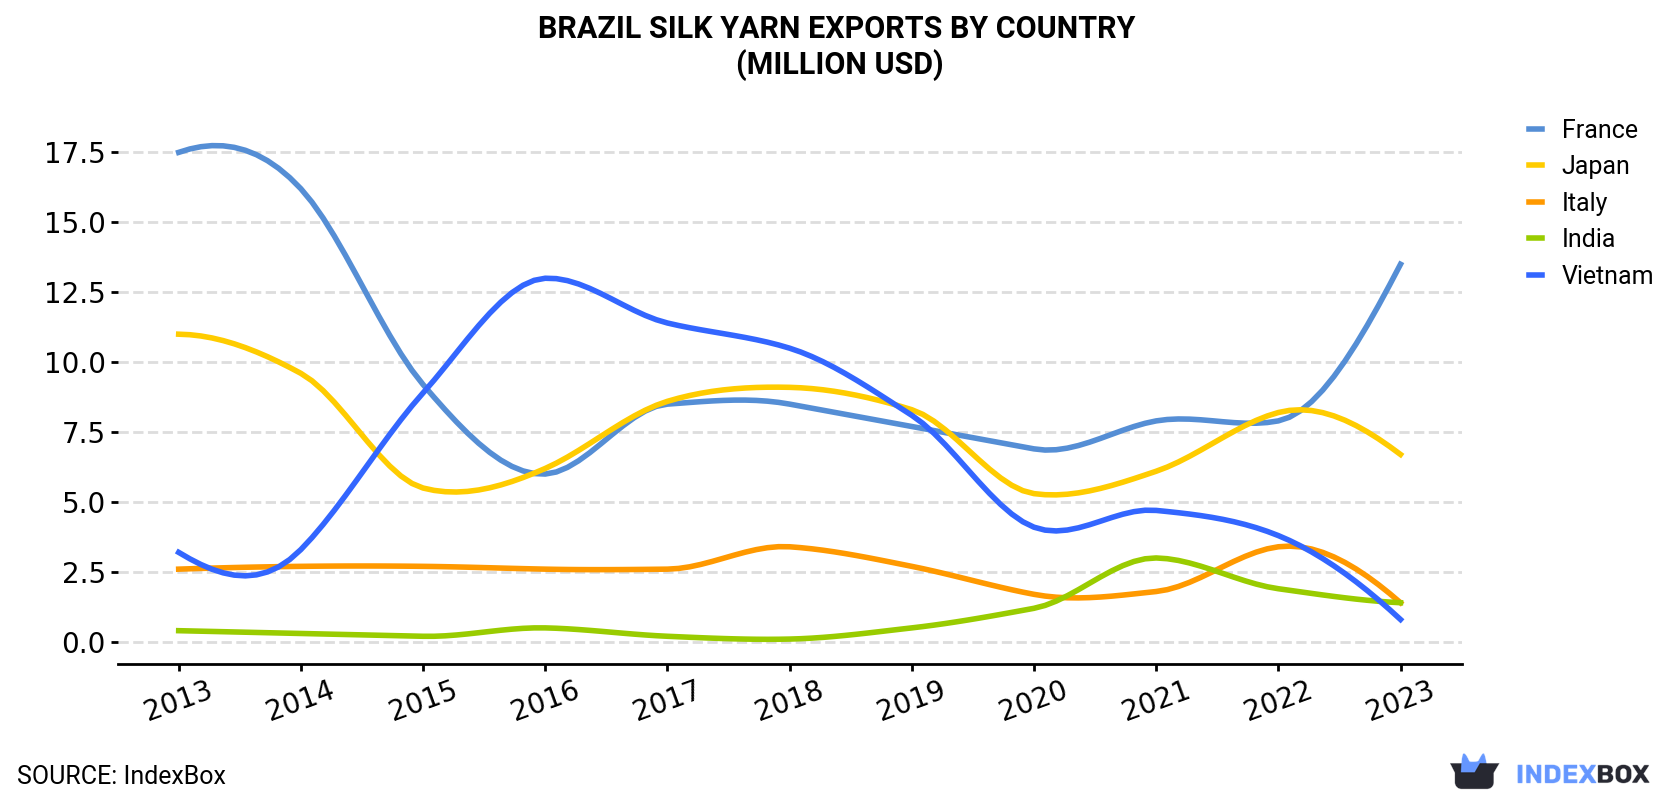 Brazil Silk Yarn Exports By Country (Million USD)